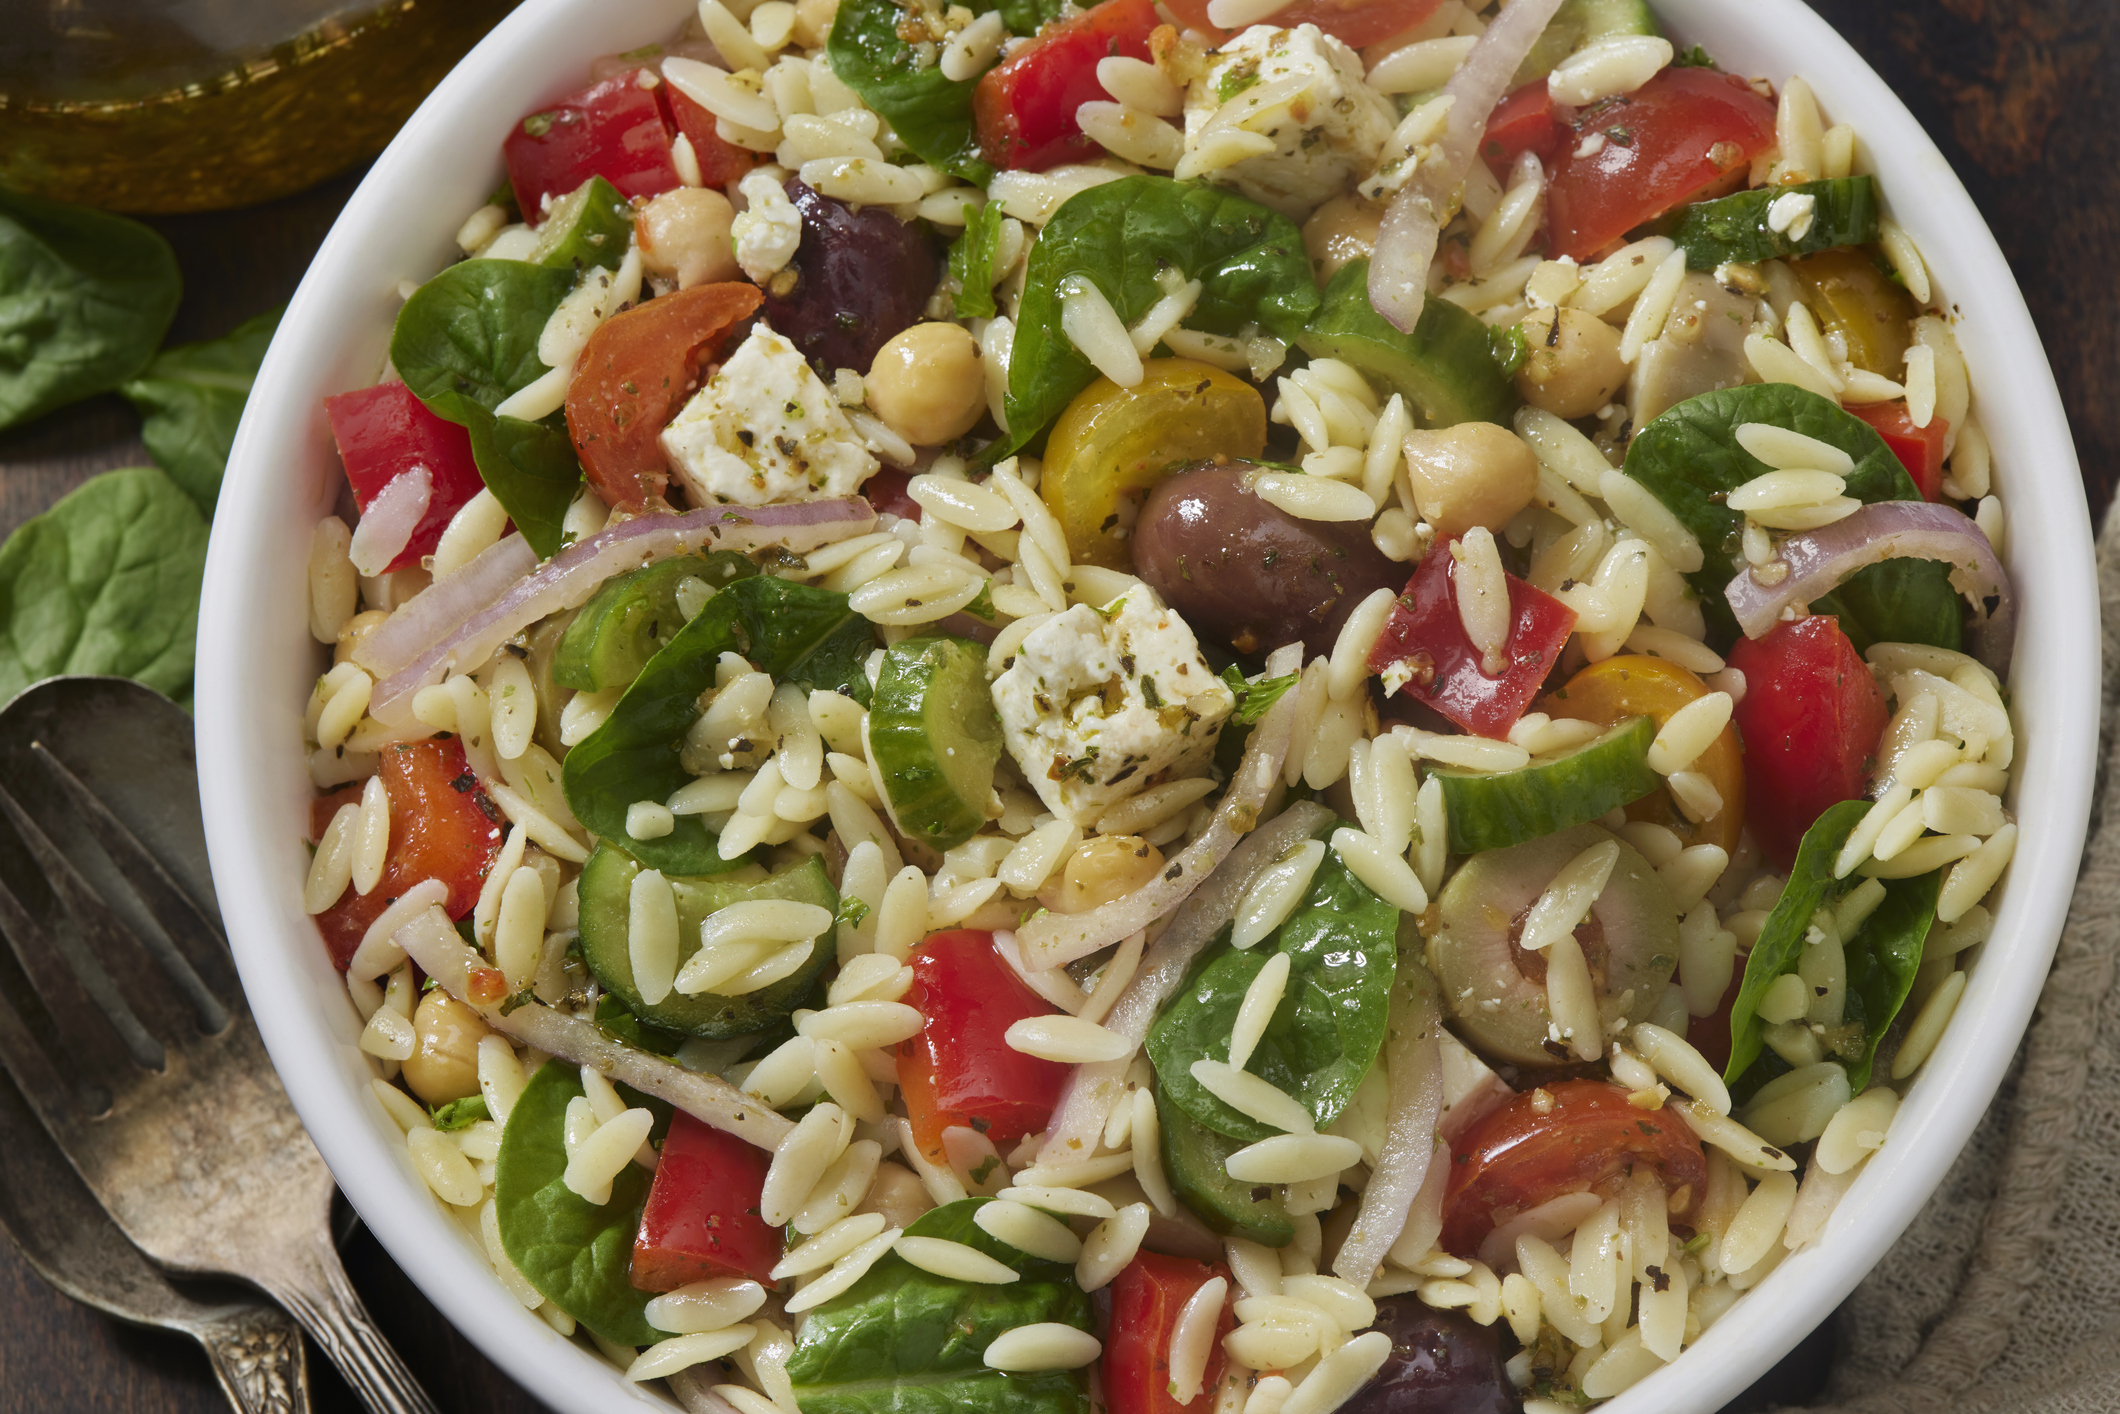 A bowl of orzo pasta salad with spinach, tomatoes, onions, chickpeas, olives, and feta cheese